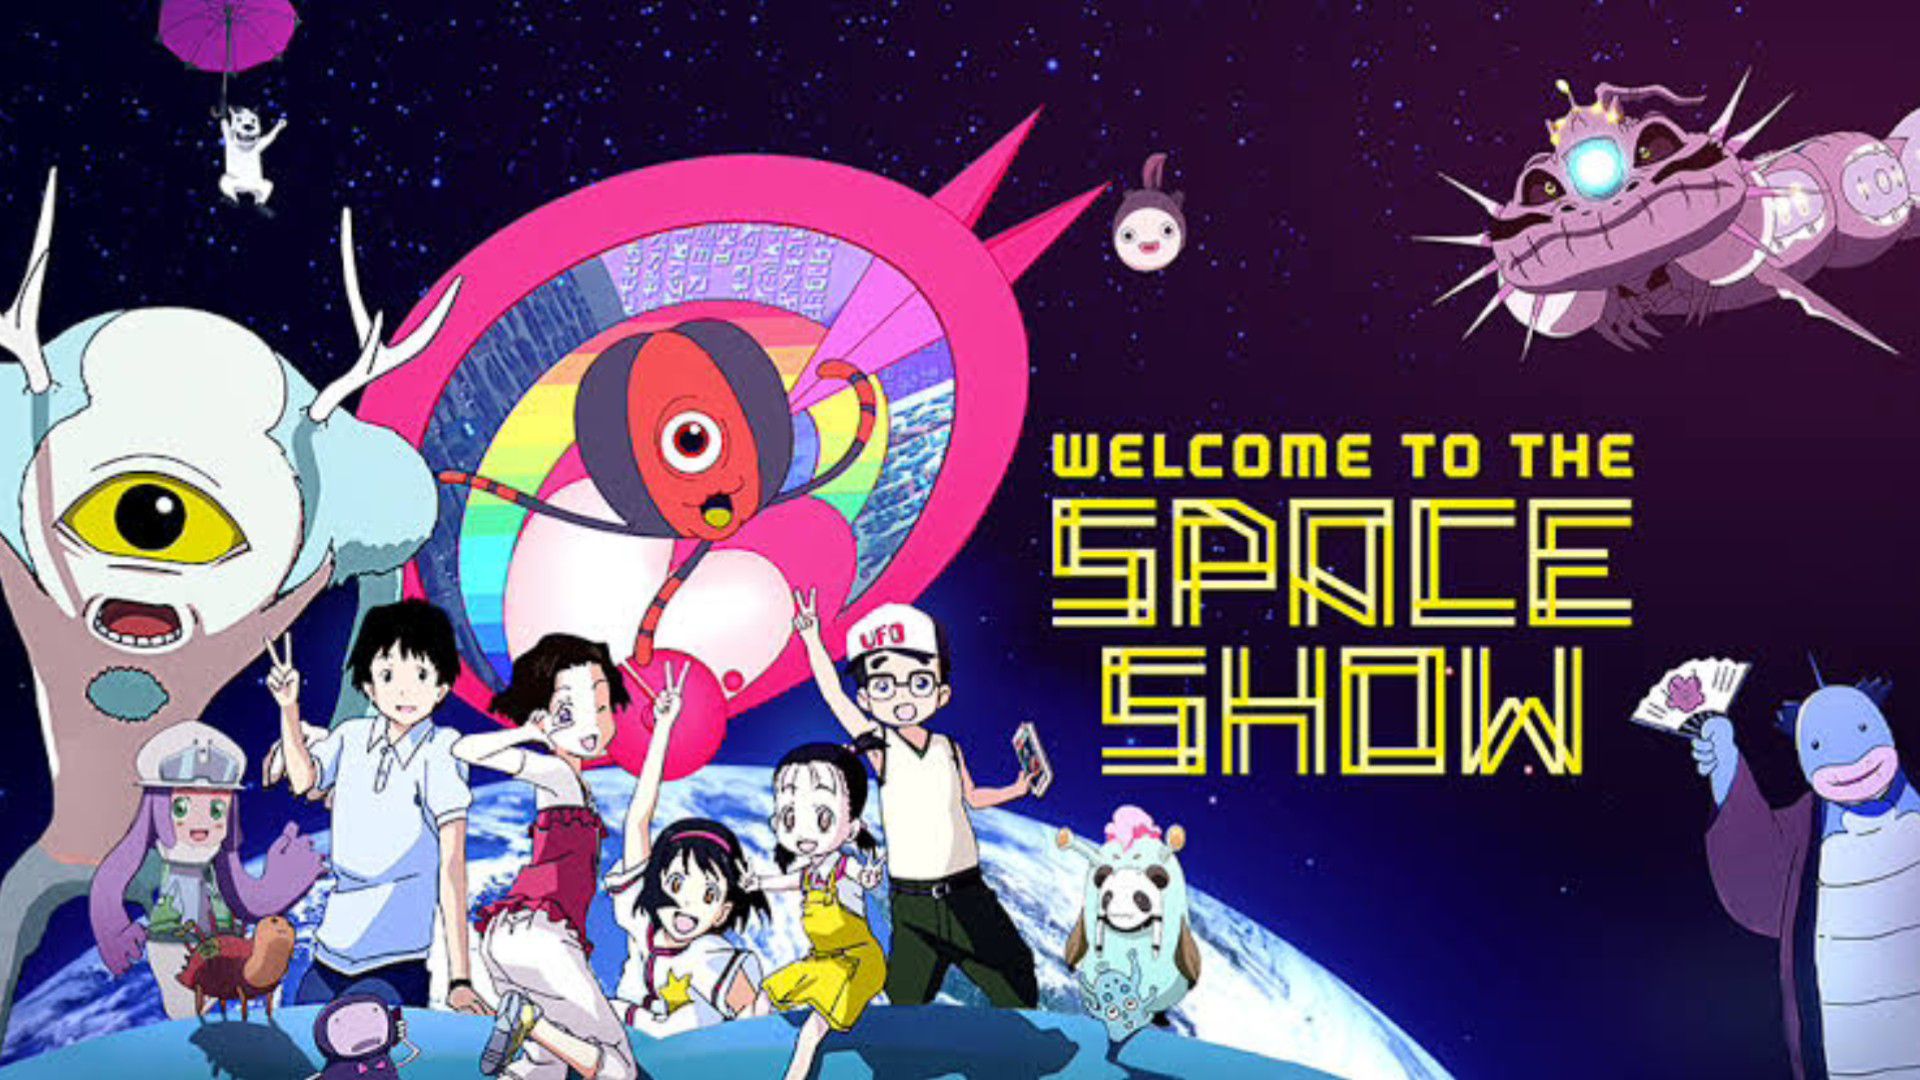 Welcome To The Space Show Official Trailer (2014) - Family Anime Adventure  Movie HD 